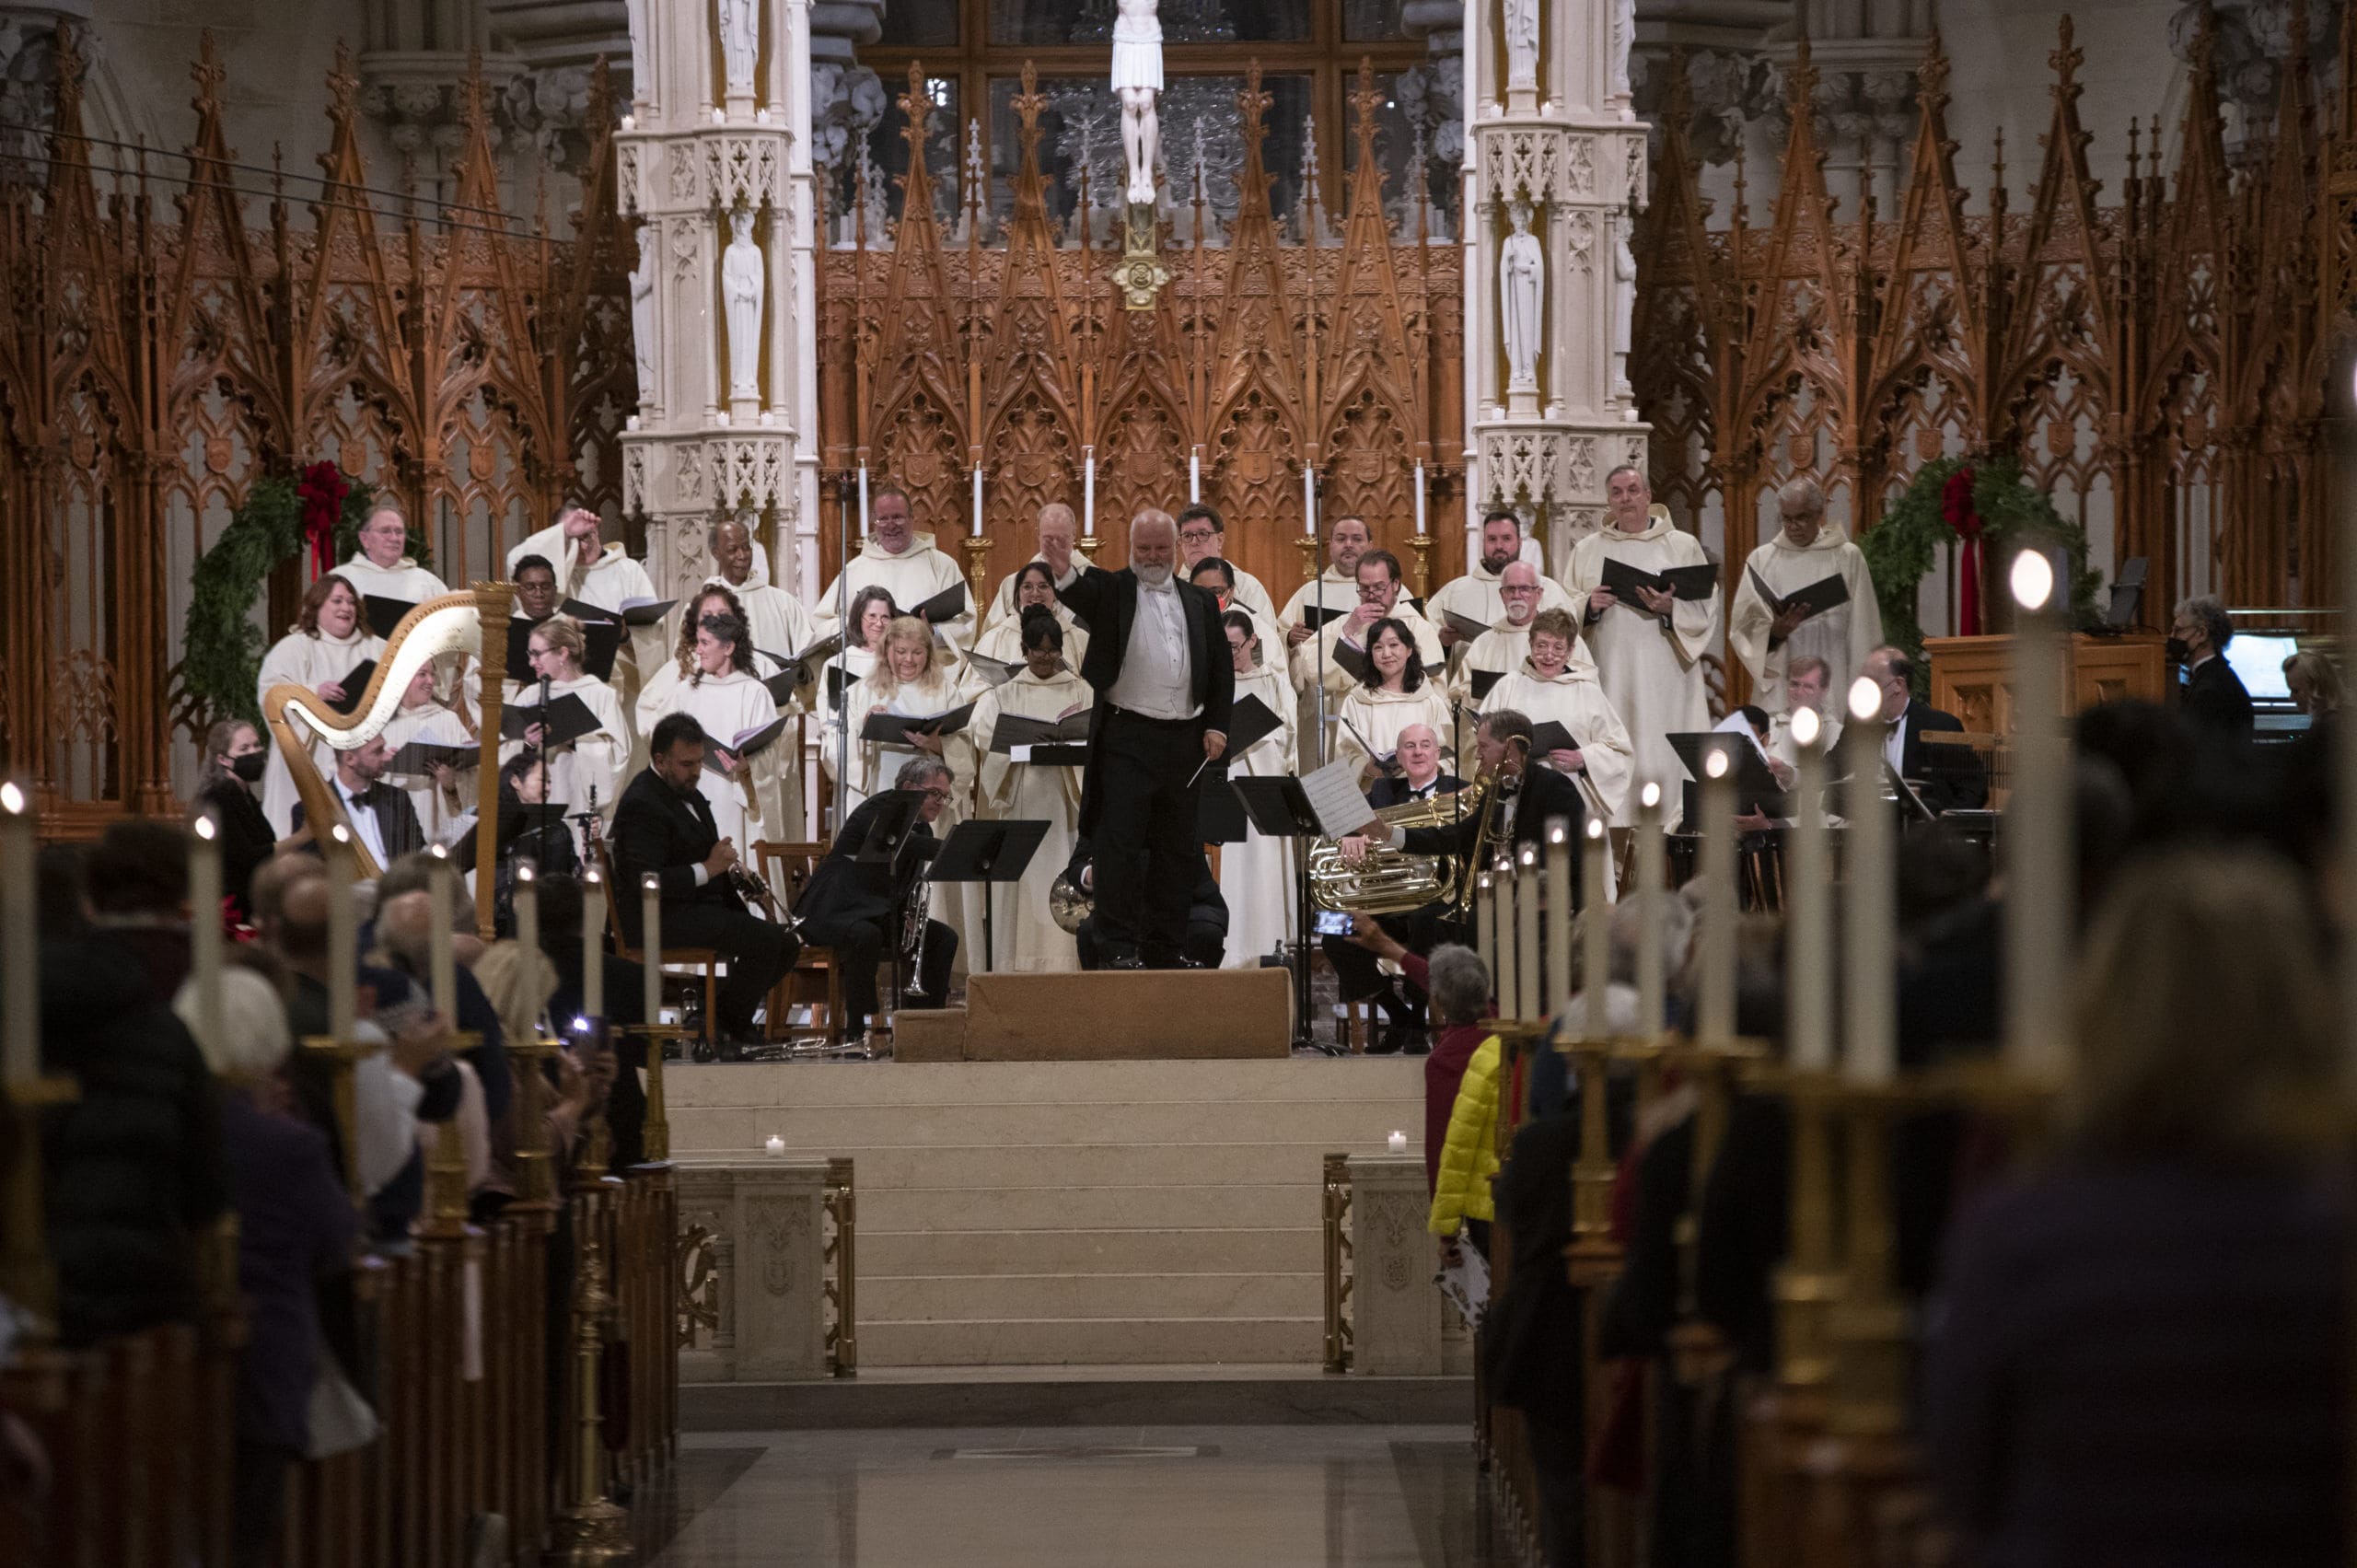 The Candlelight Carol Sing returned to the Cathedral Basilica of the Sacred Heart last week for two nights and was a sight to behold.